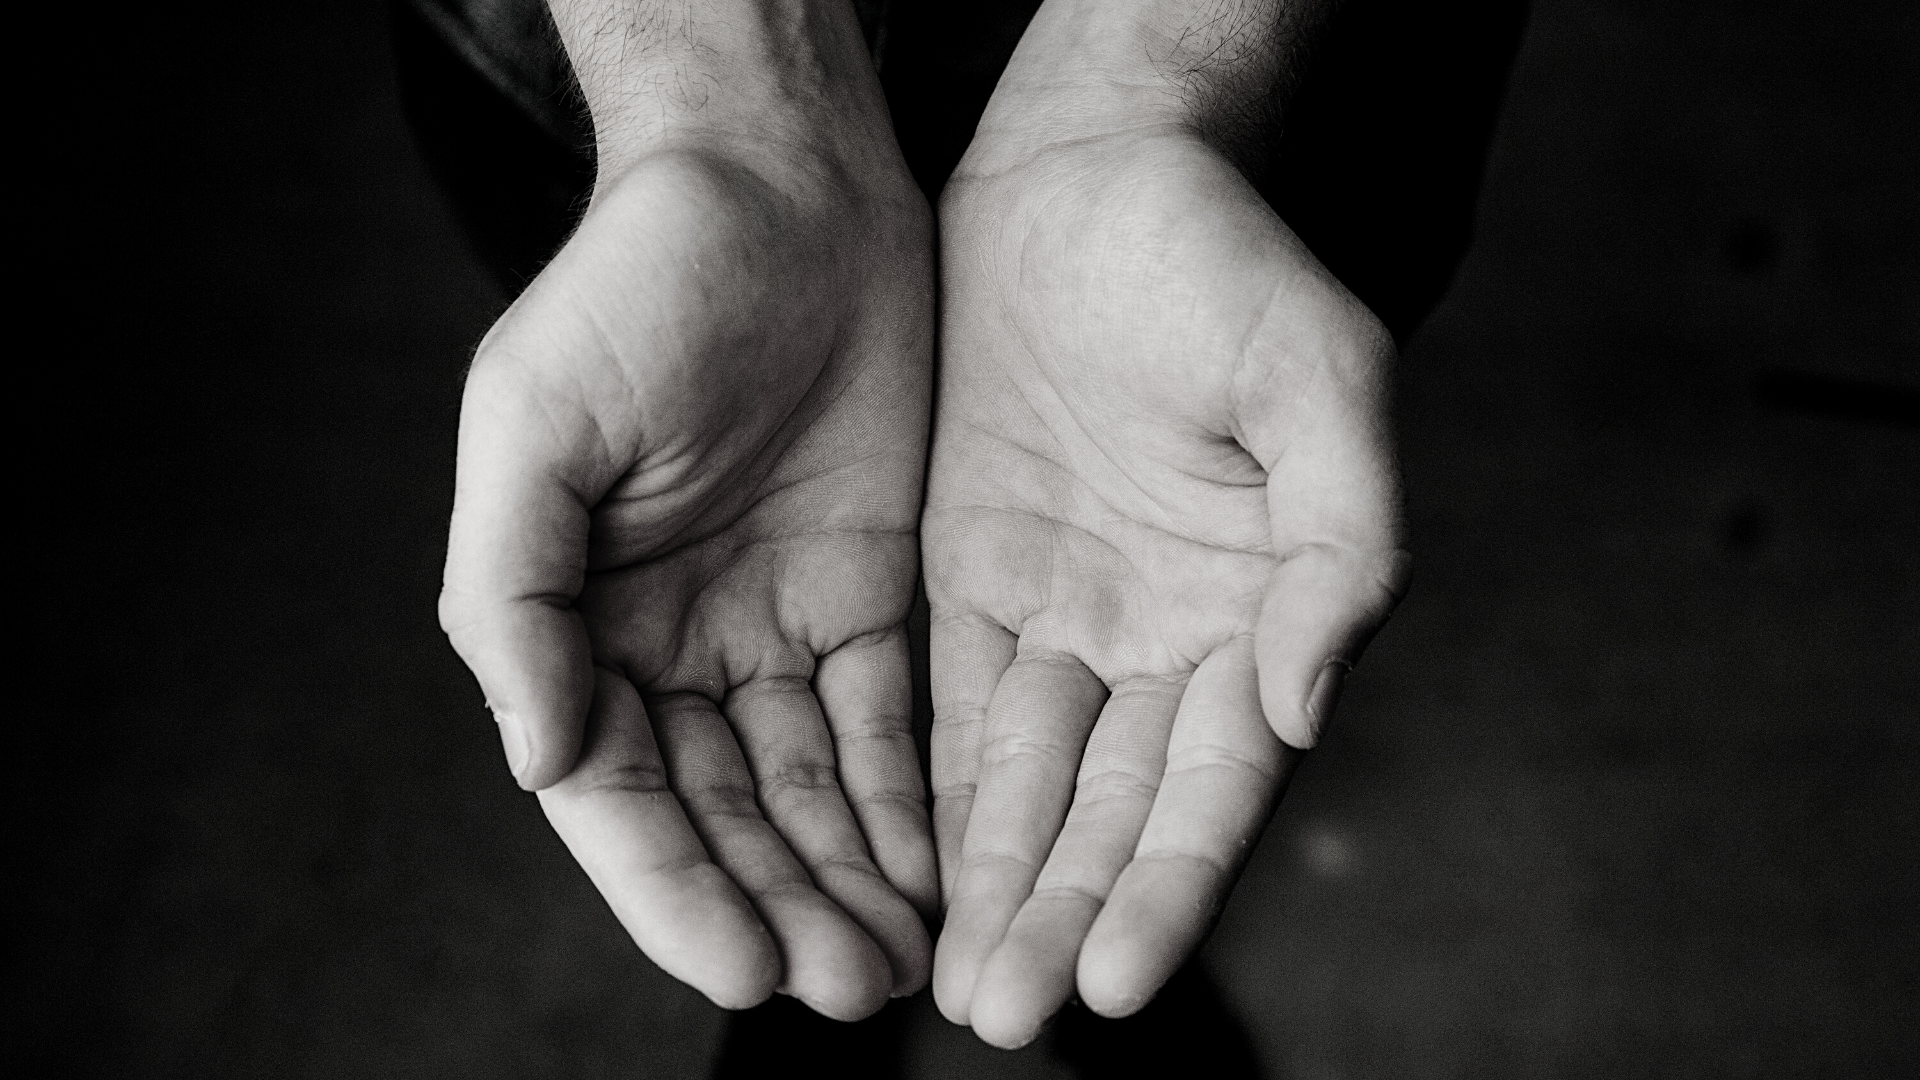 black and white picture of two hands cupped together and extended ready to receive something